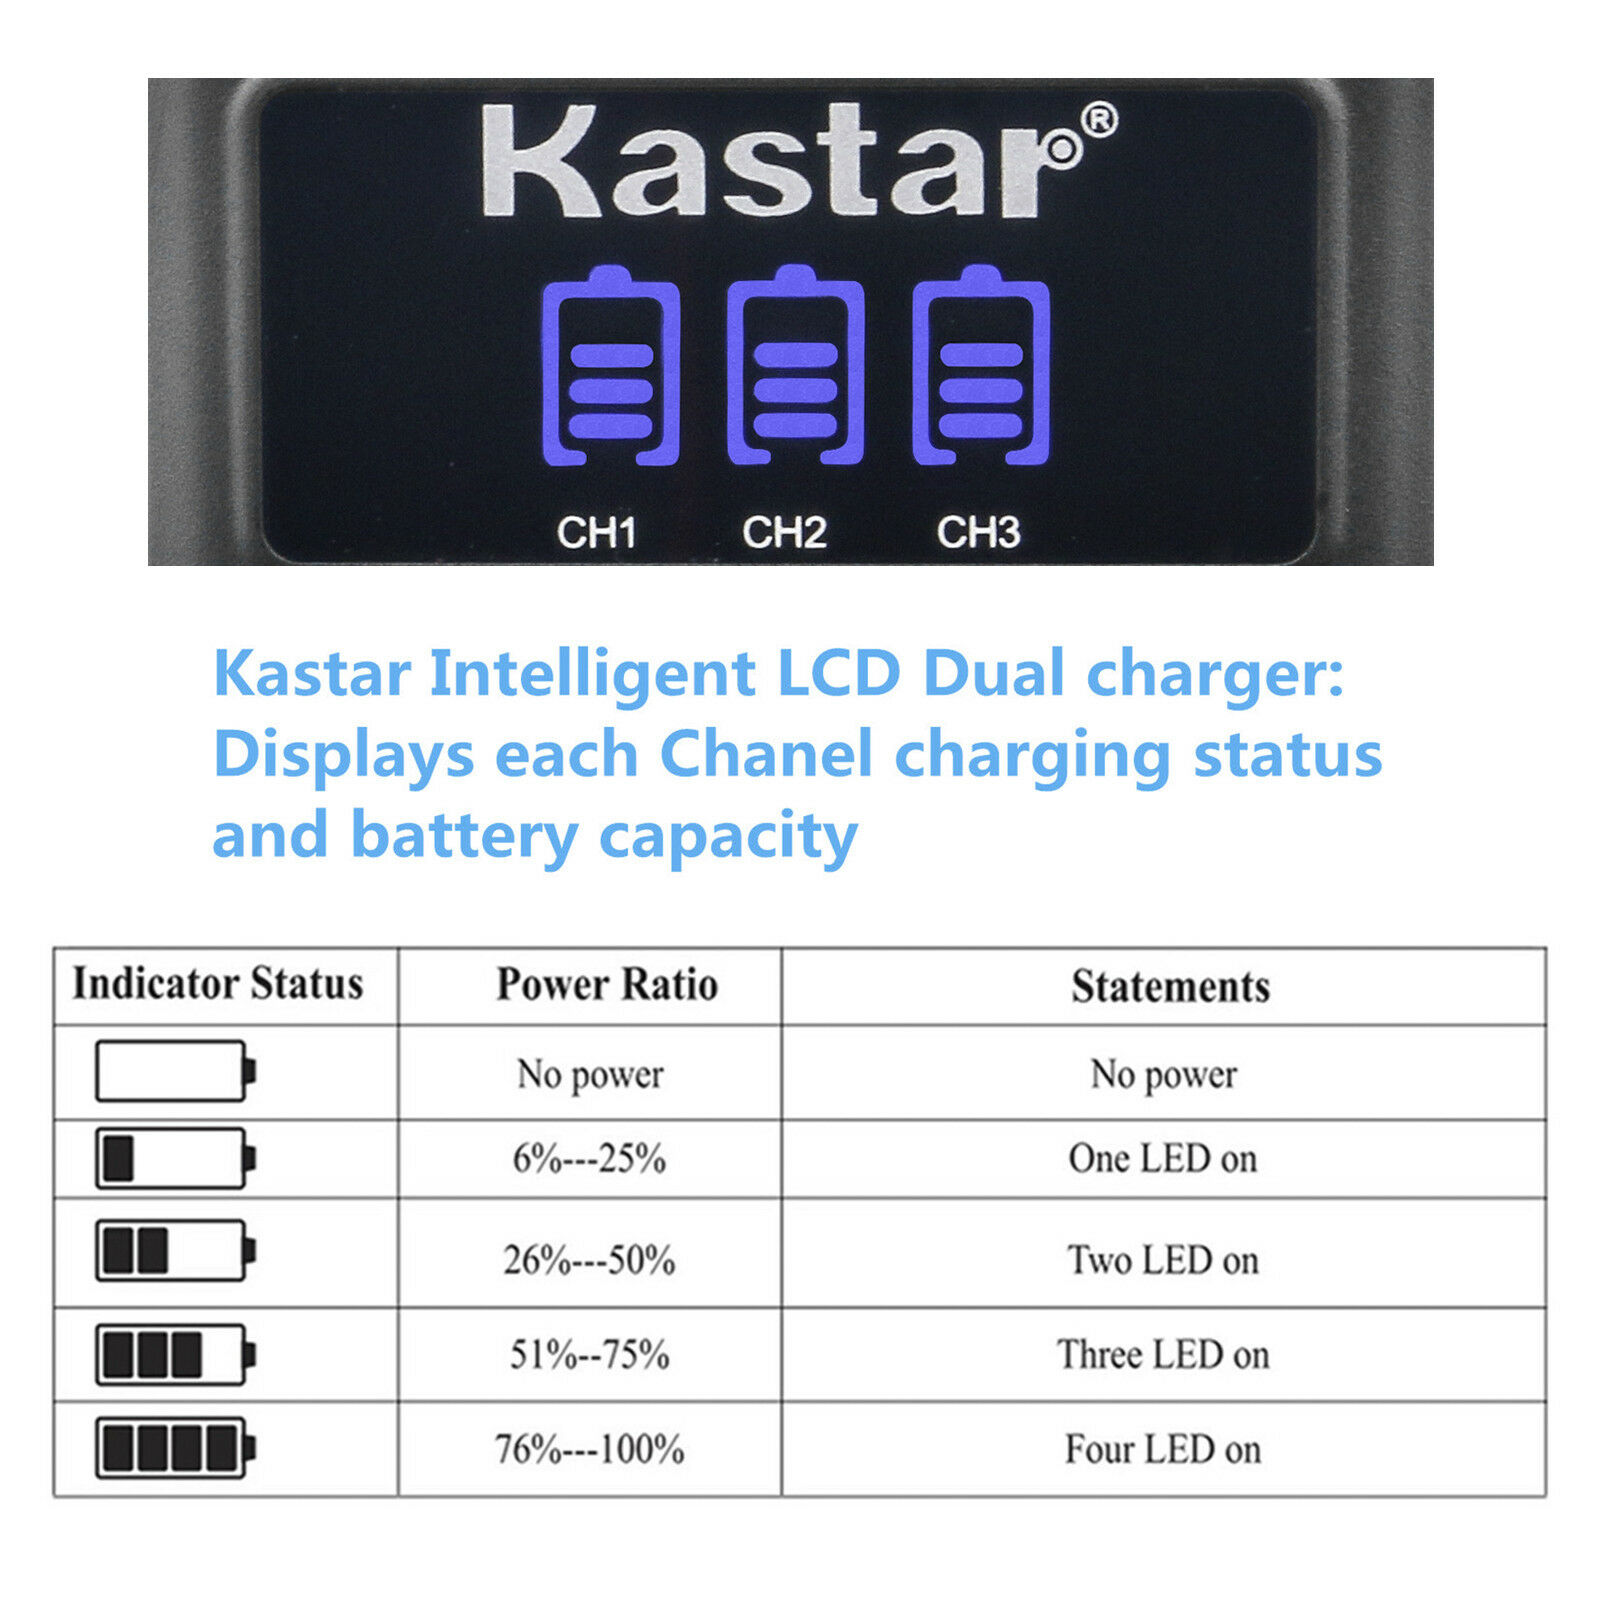 Kastar 3 Pack Battery and LCD Triple USB Charger Compatible with Olympus Traveller SH-21, Traveller SH-25MR, SP-720UZ, SP-800, SP-800UZ, SP-810, SP-810UZ, SP-815UZ, Stylus 1010, Stylus 1020 - image 3 of 6